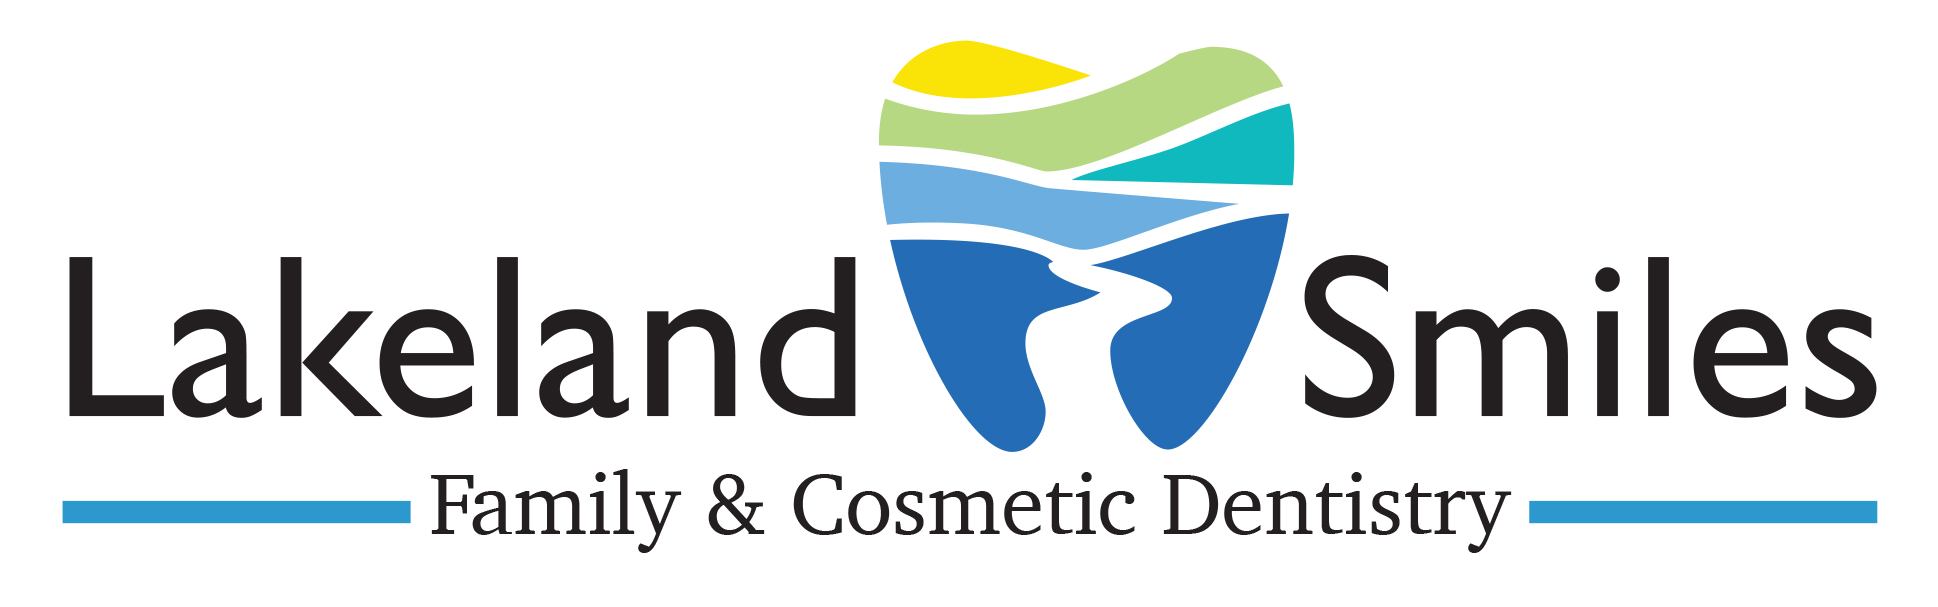 Link to Lakeland Smiles home page